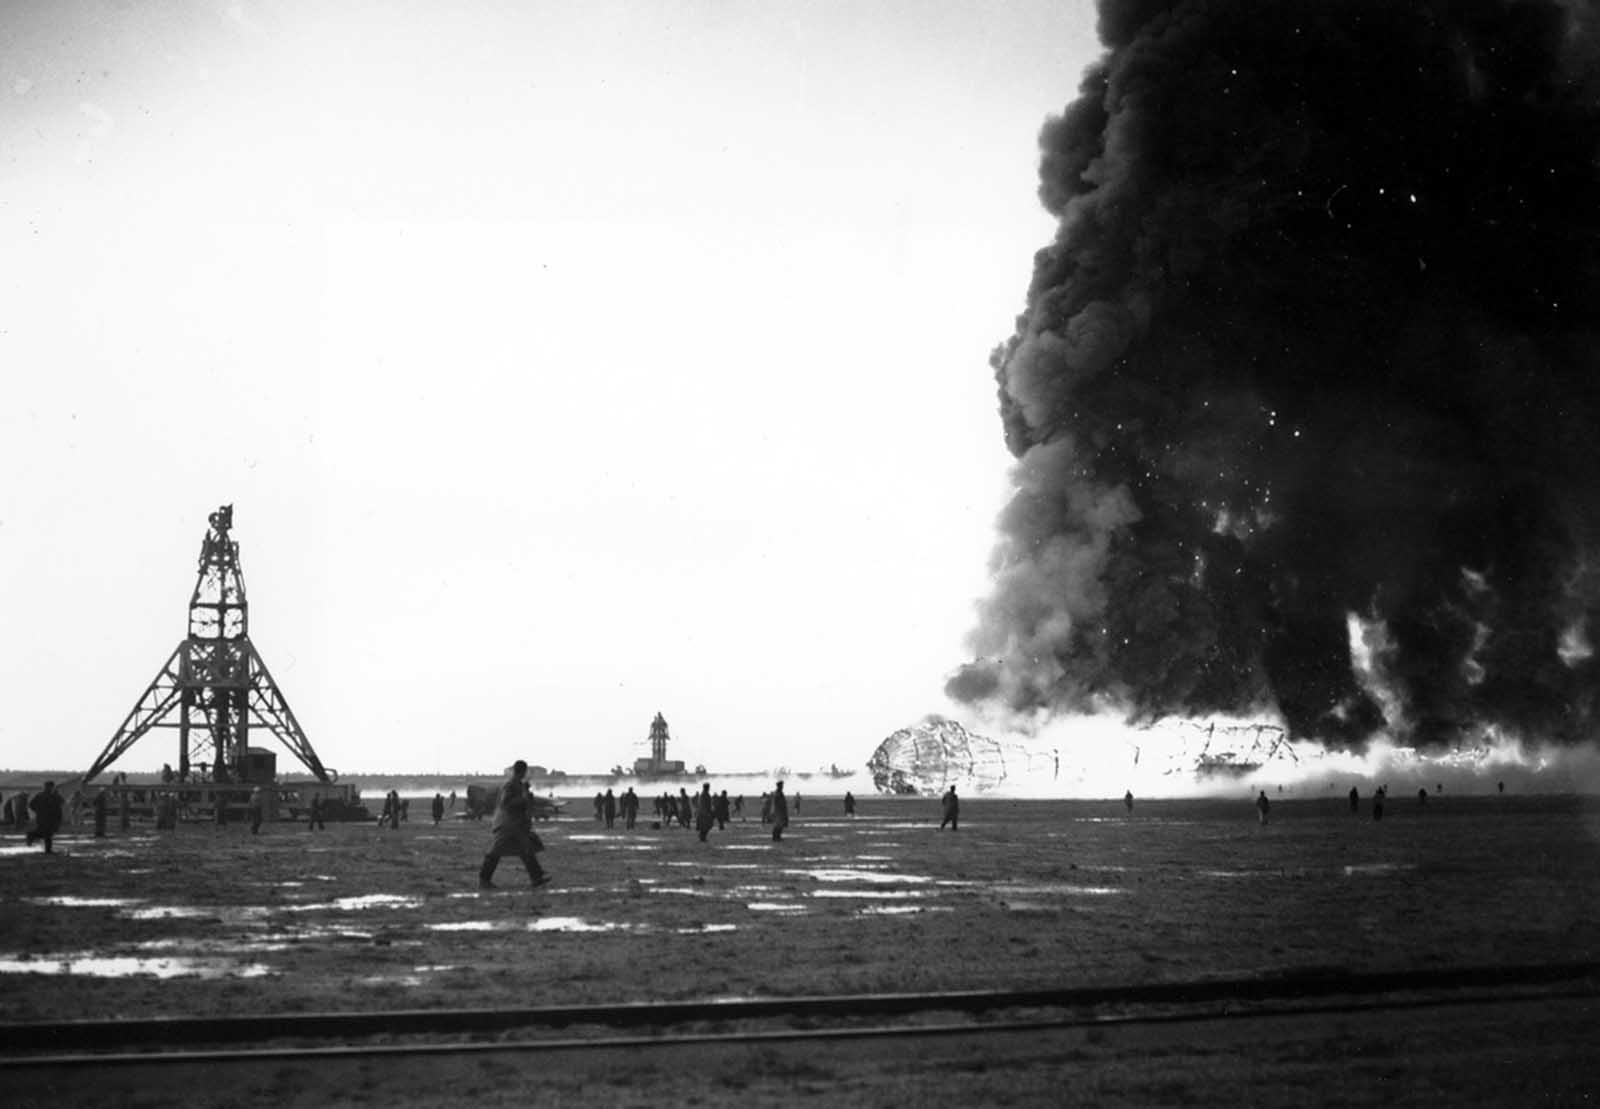 The wreckage of the Hindenburg in Lakehurst, New Jersey, on May 6, 1937.